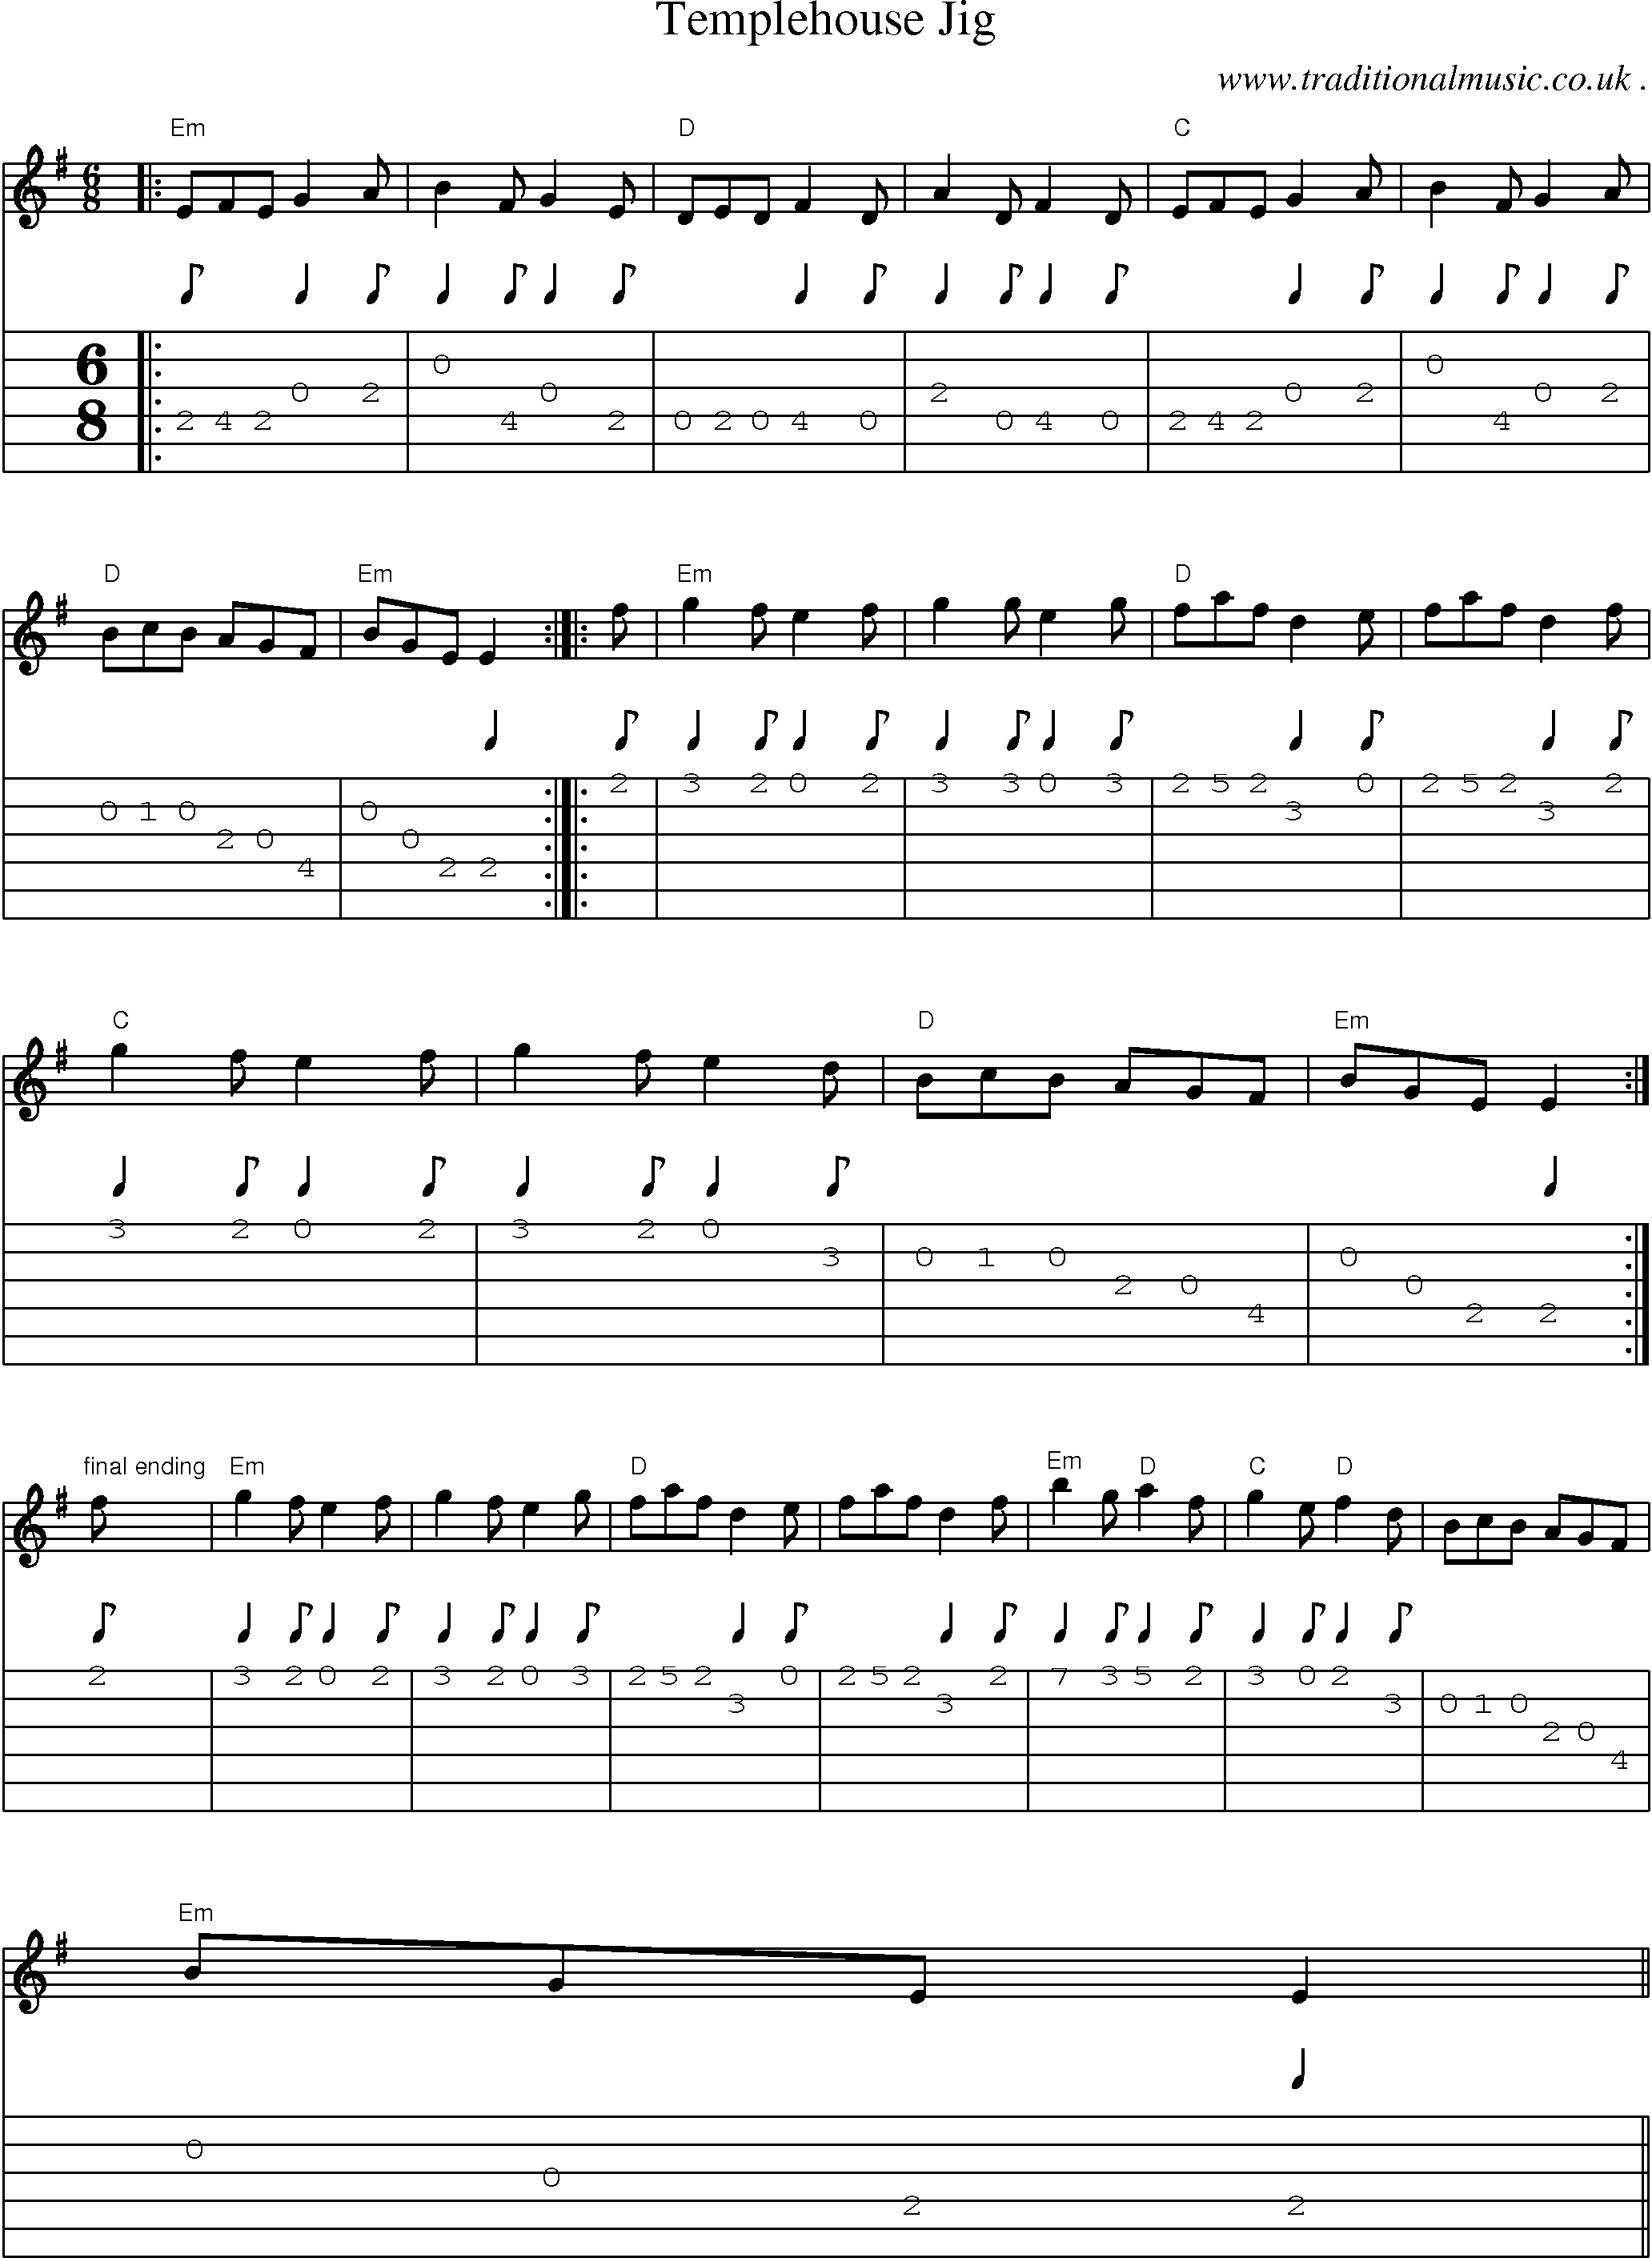 Music Score and Guitar Tabs for Templehouse Jig